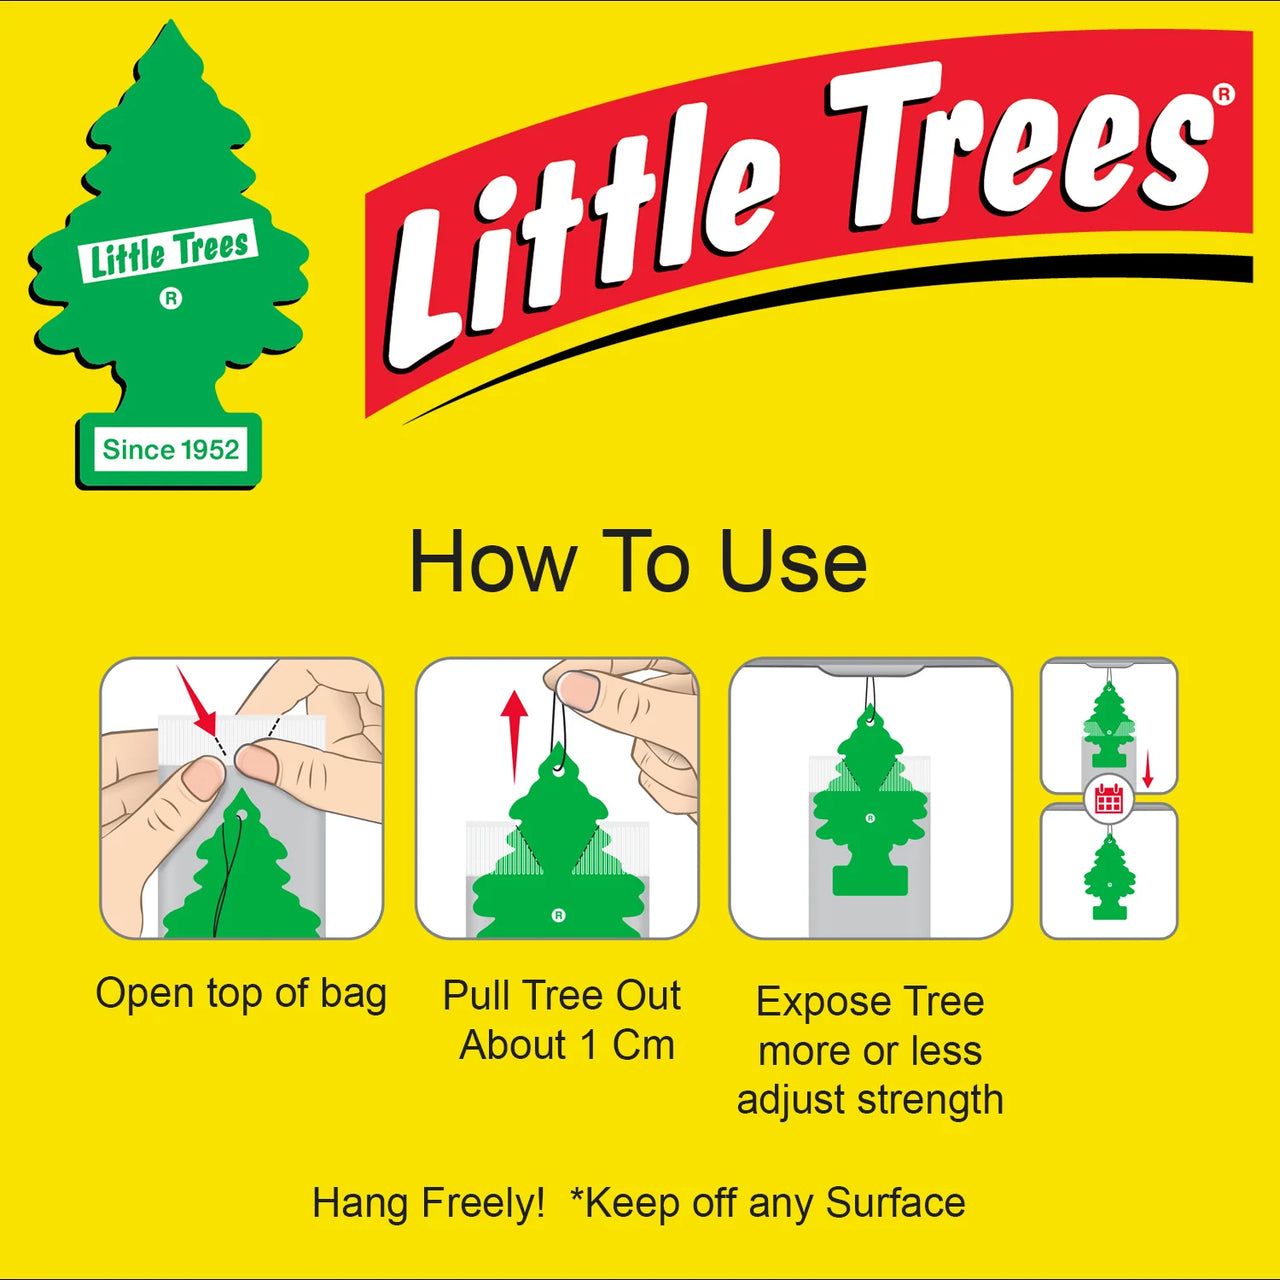 LITTLE TREES-New Car Scent-1 piece